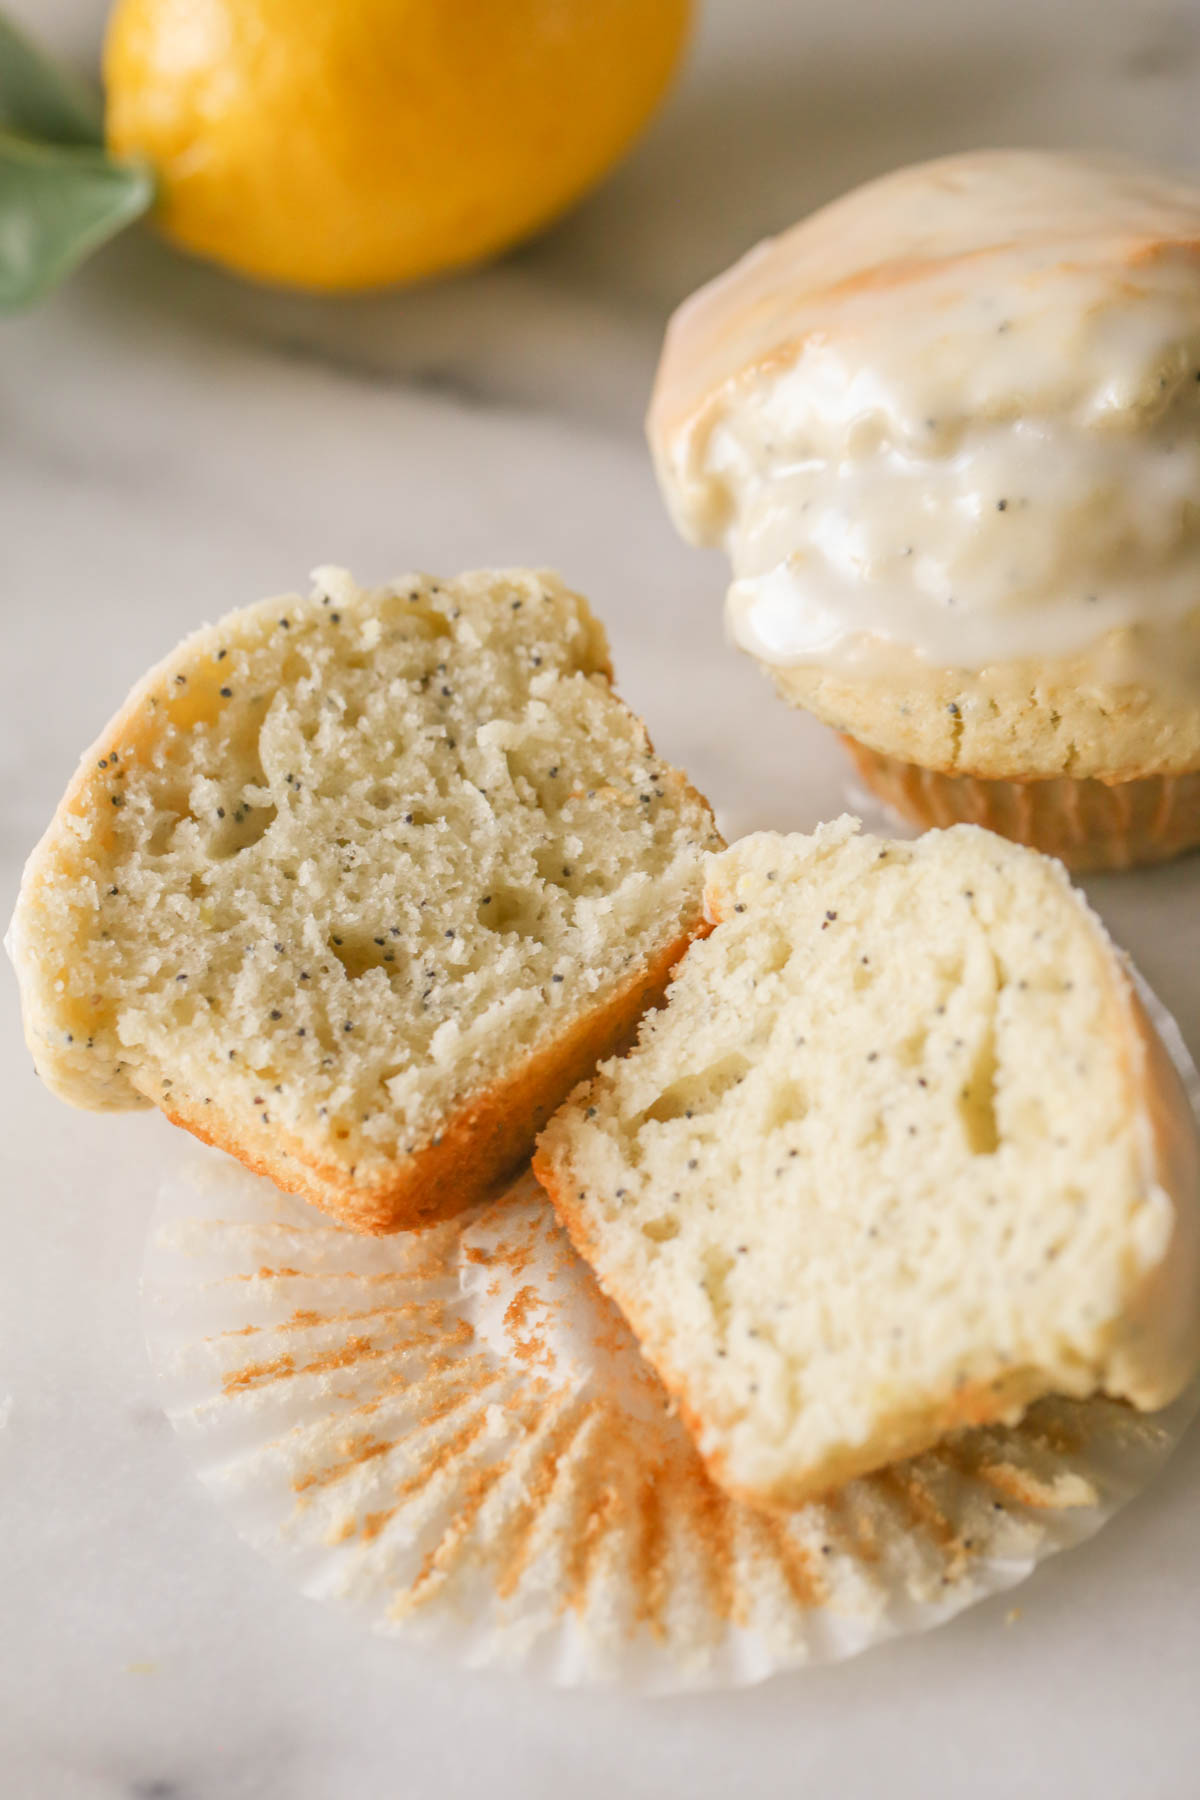 A Glazed Lemon Poppy Seed Muffin sliced in half, placed on the muffin liner, with another whole muffin next to it and a whole lemon in the background. 